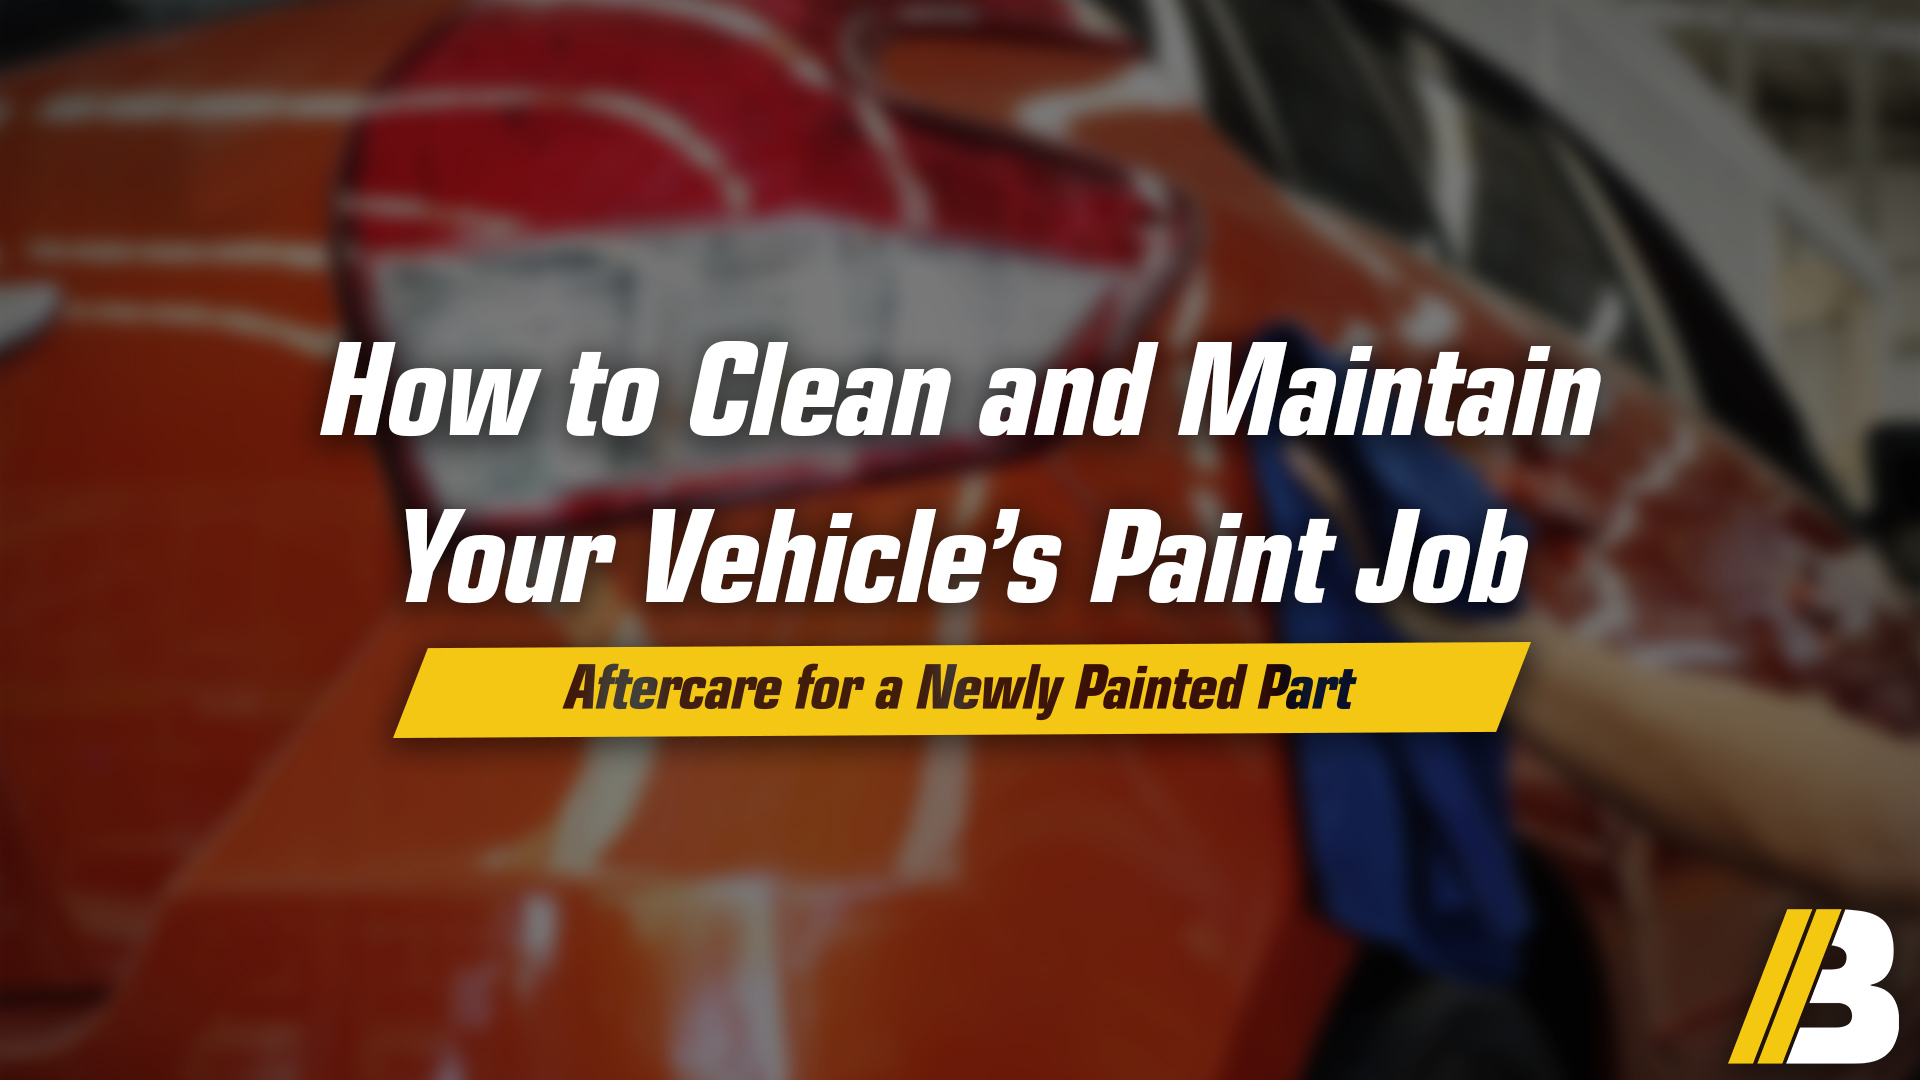 How to Clean and Maintain Your Vehicle's Paint Job